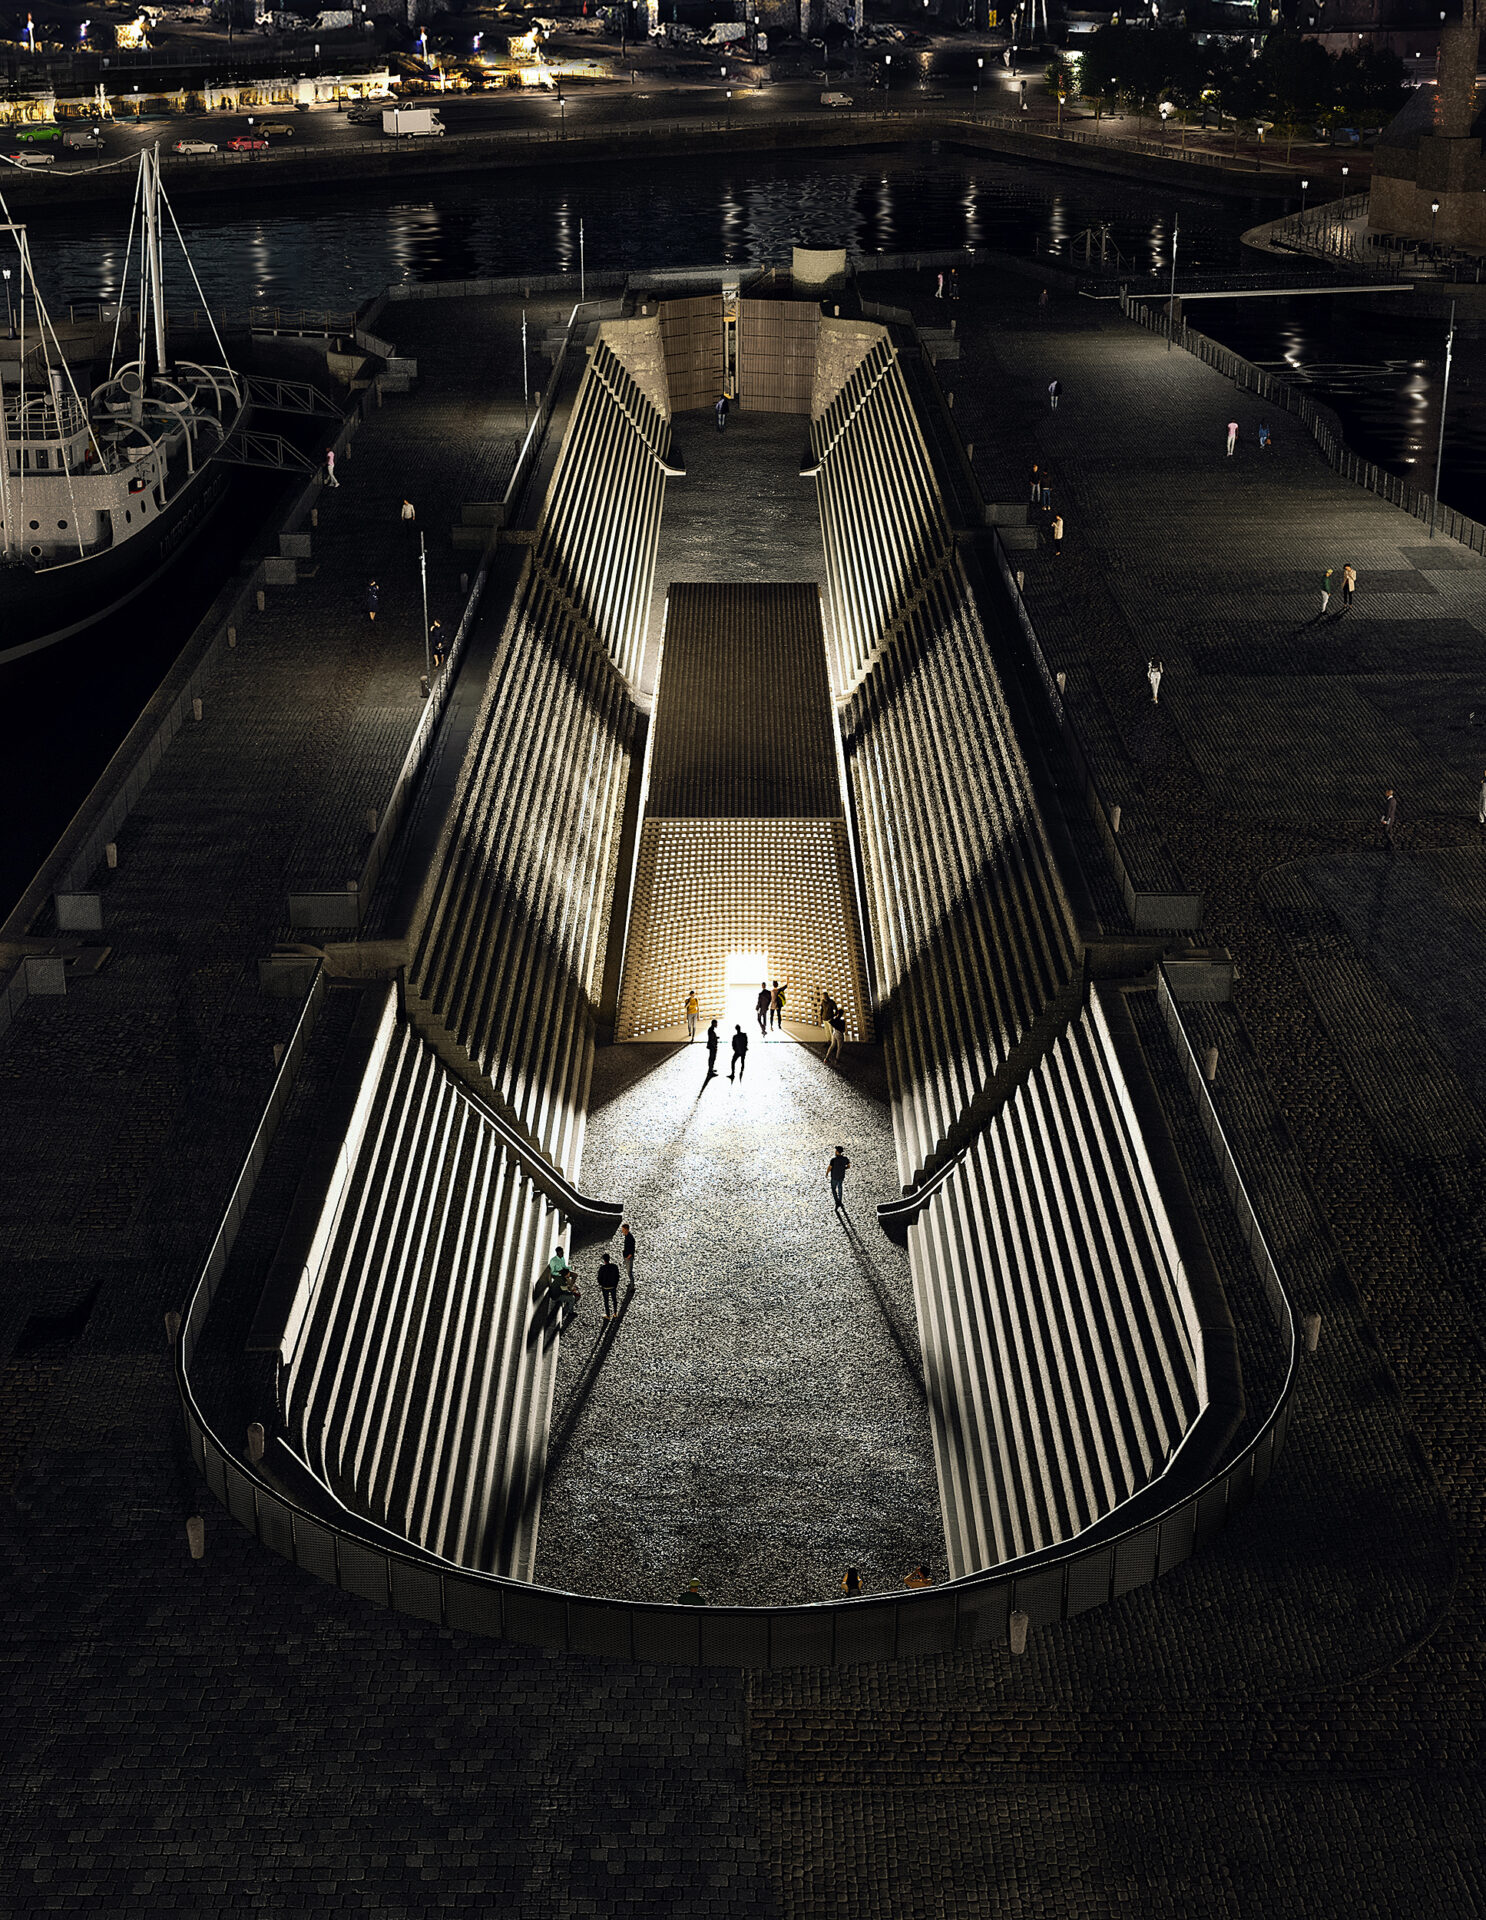 Night-time view of the South Dry Dock. Credit: Asif Khan Studio